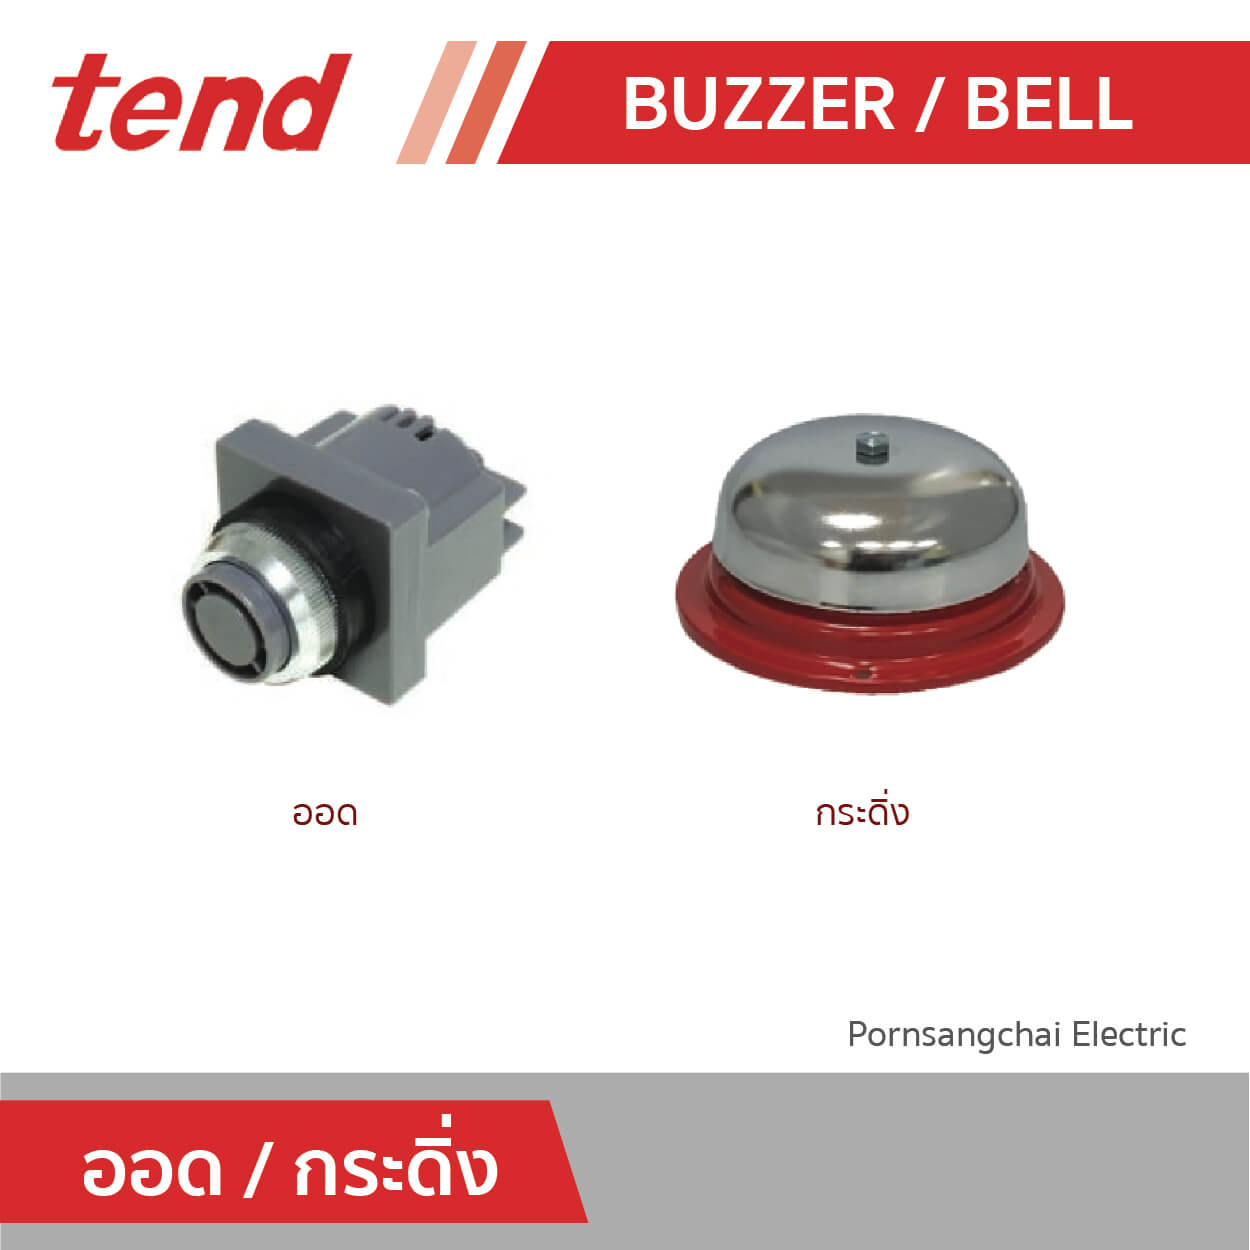 tend Buzzer and Bell